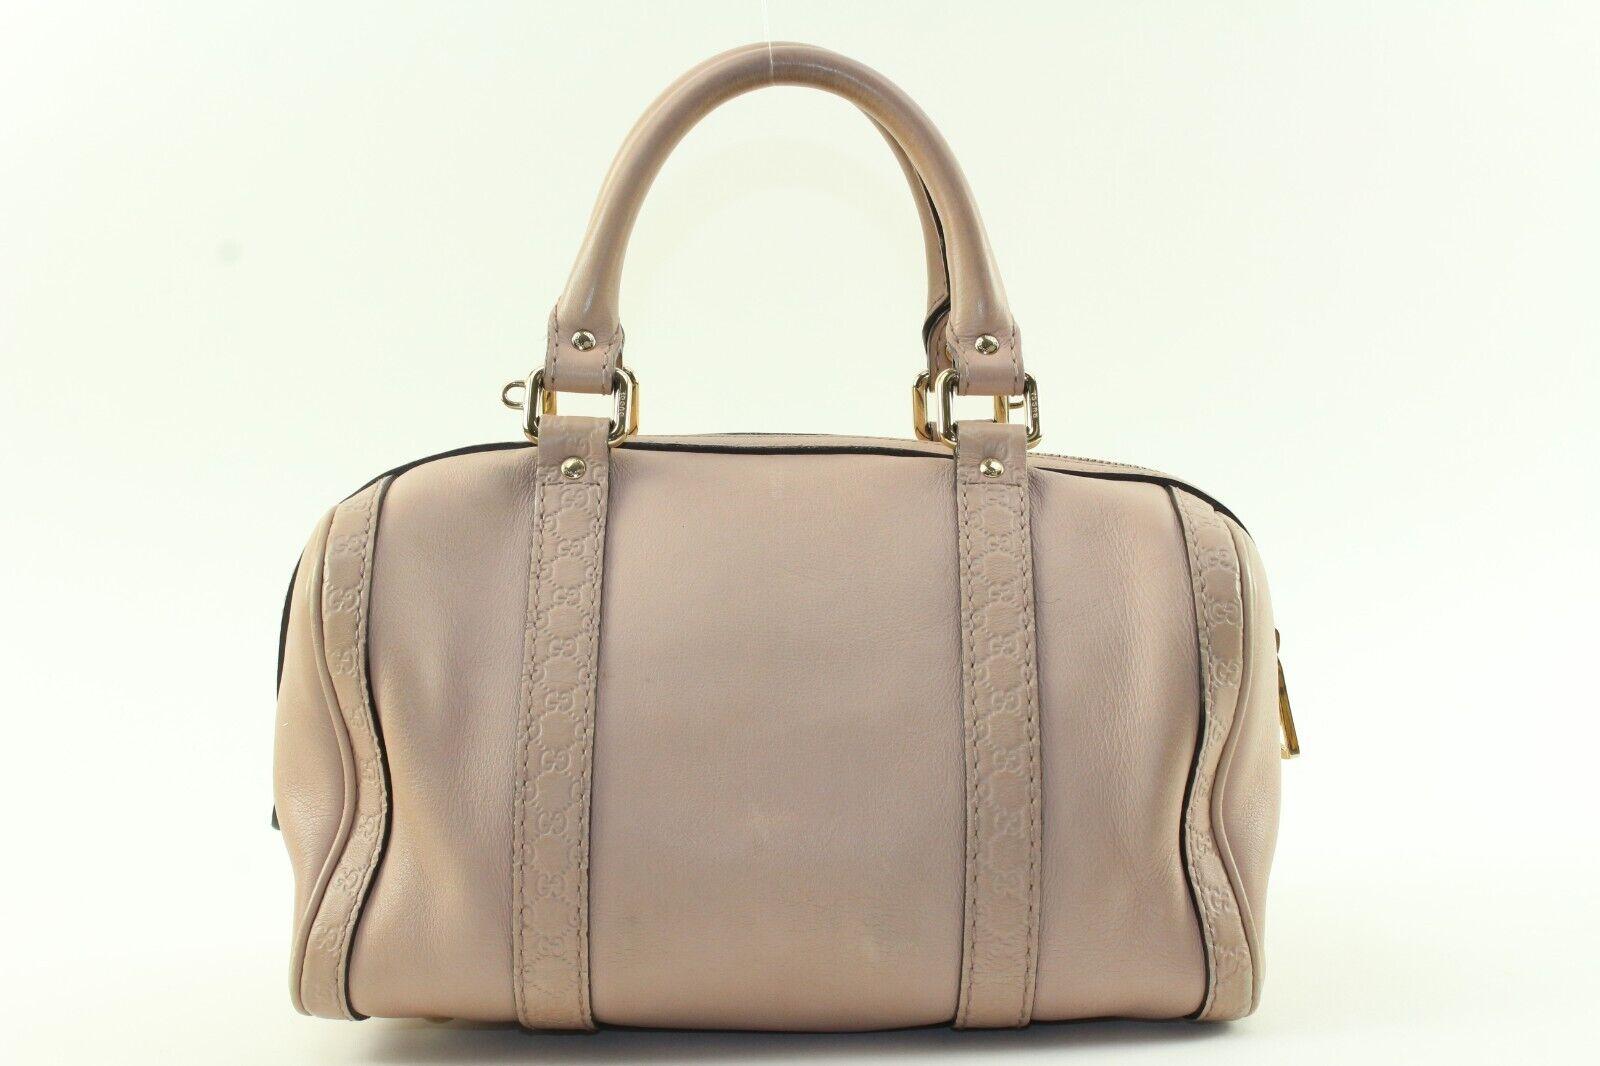 GUCCI Leather Guccissima Trim Boston Bag with Strap Joy 1GK1222K In Good Condition For Sale In Dix hills, NY